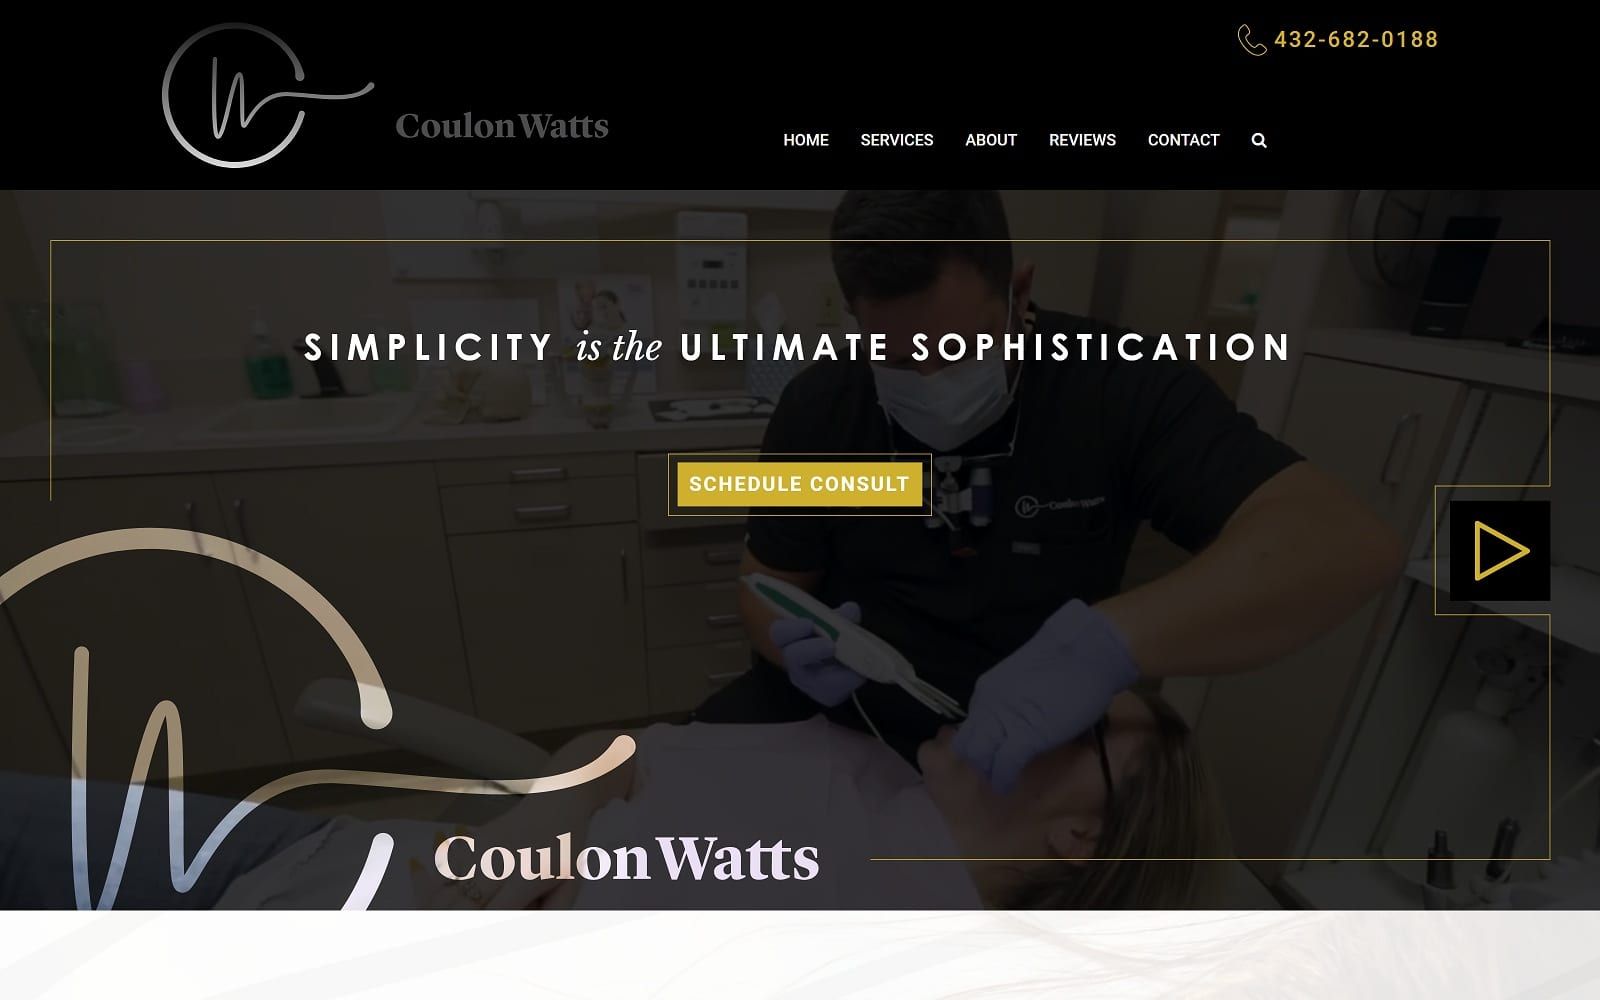 The screenshot of coulon watts coulonwatts. Com website